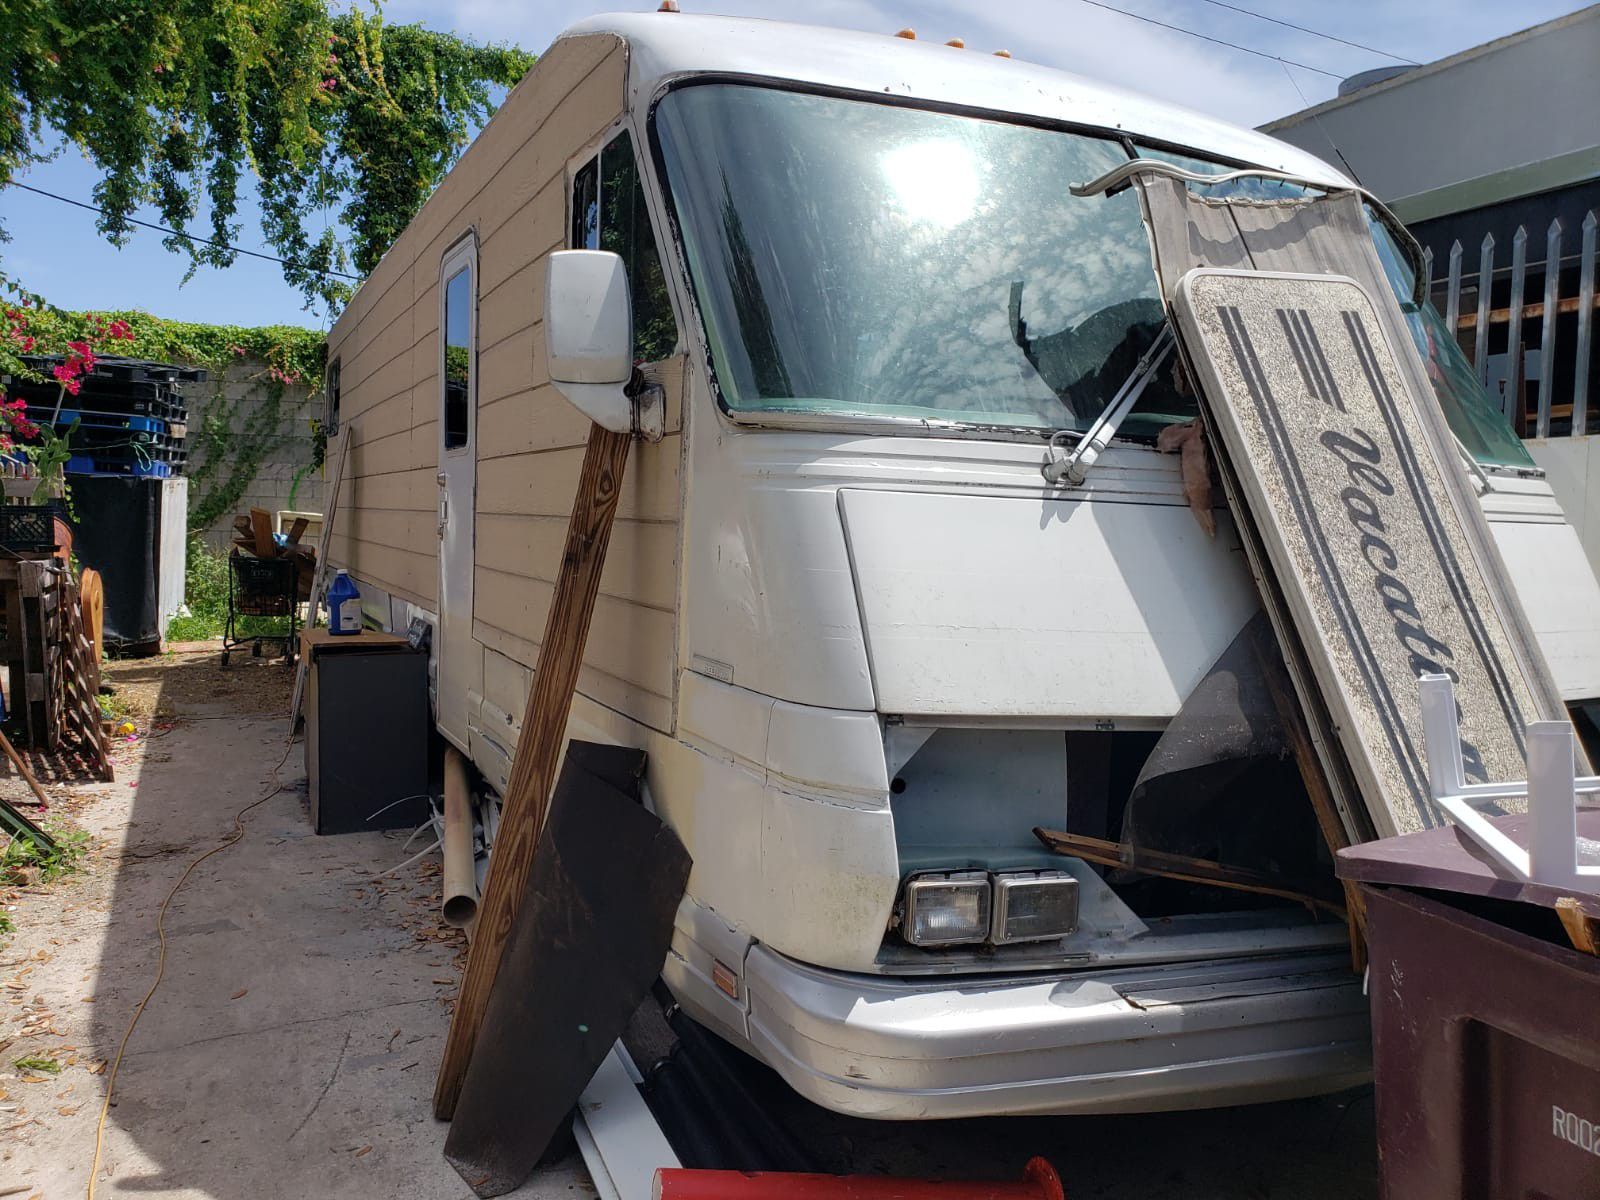 RV for sale! (#1)